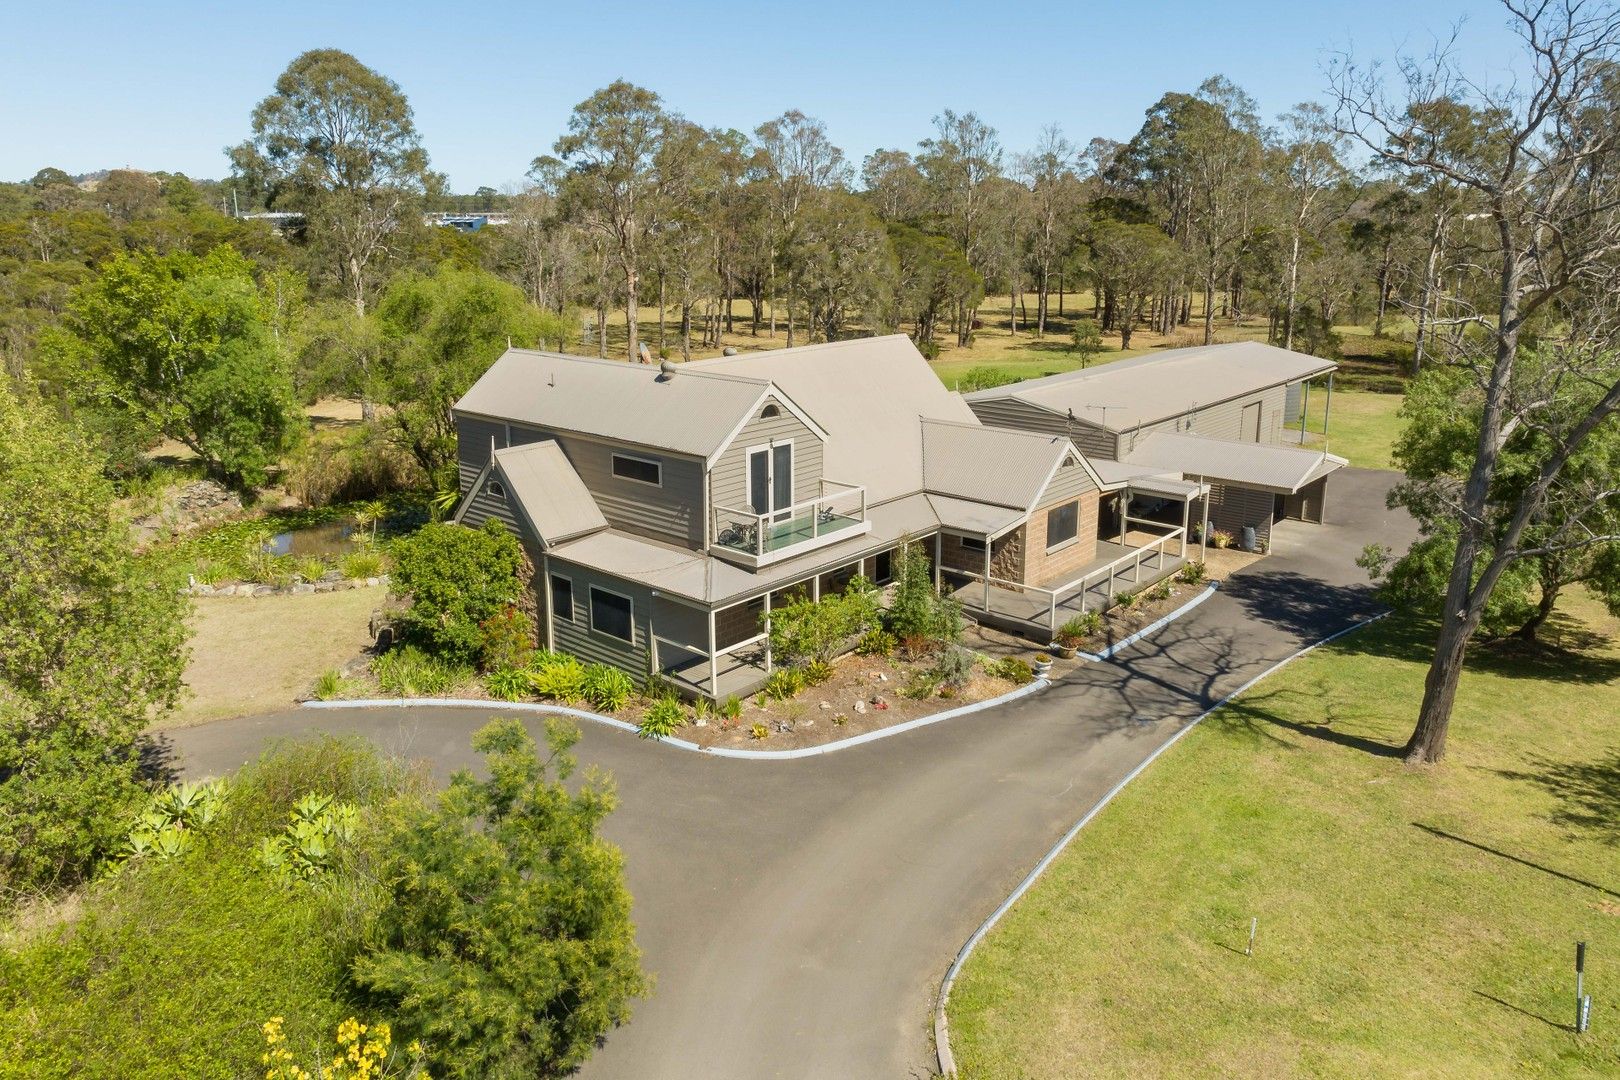 5 bedrooms Acreage / Semi-Rural in 381 Old Southern Road SOUTH NOWRA NSW, 2541